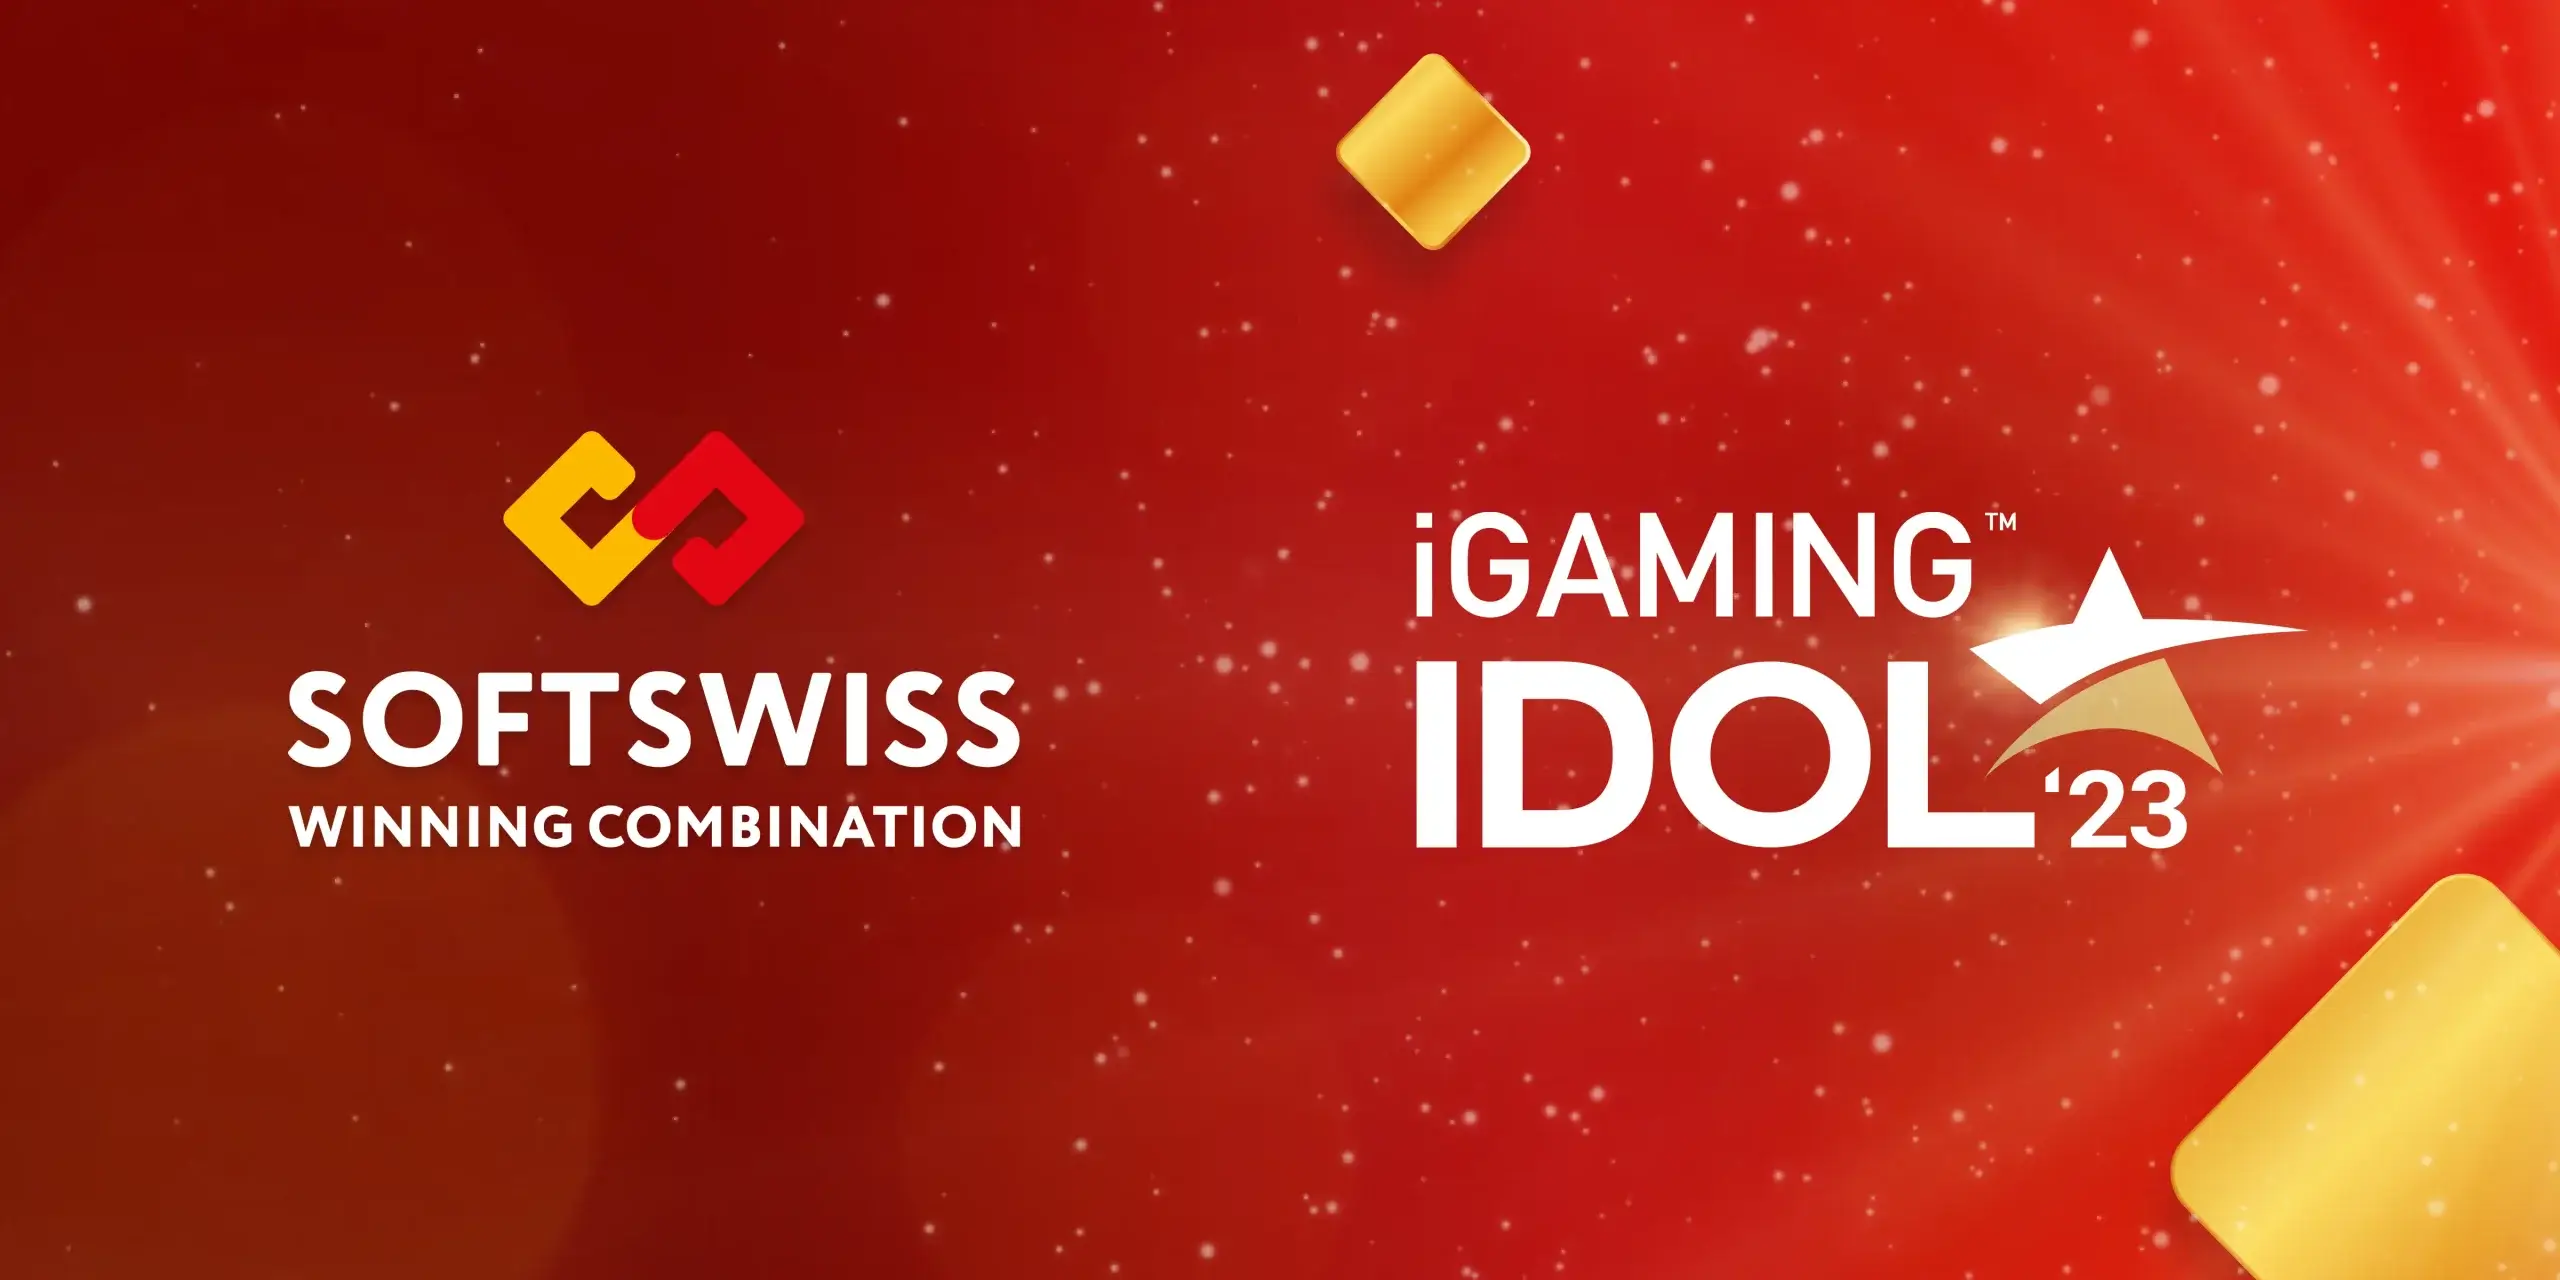 SOFTSWISS Becomes iGaming Brand IDOL 2023